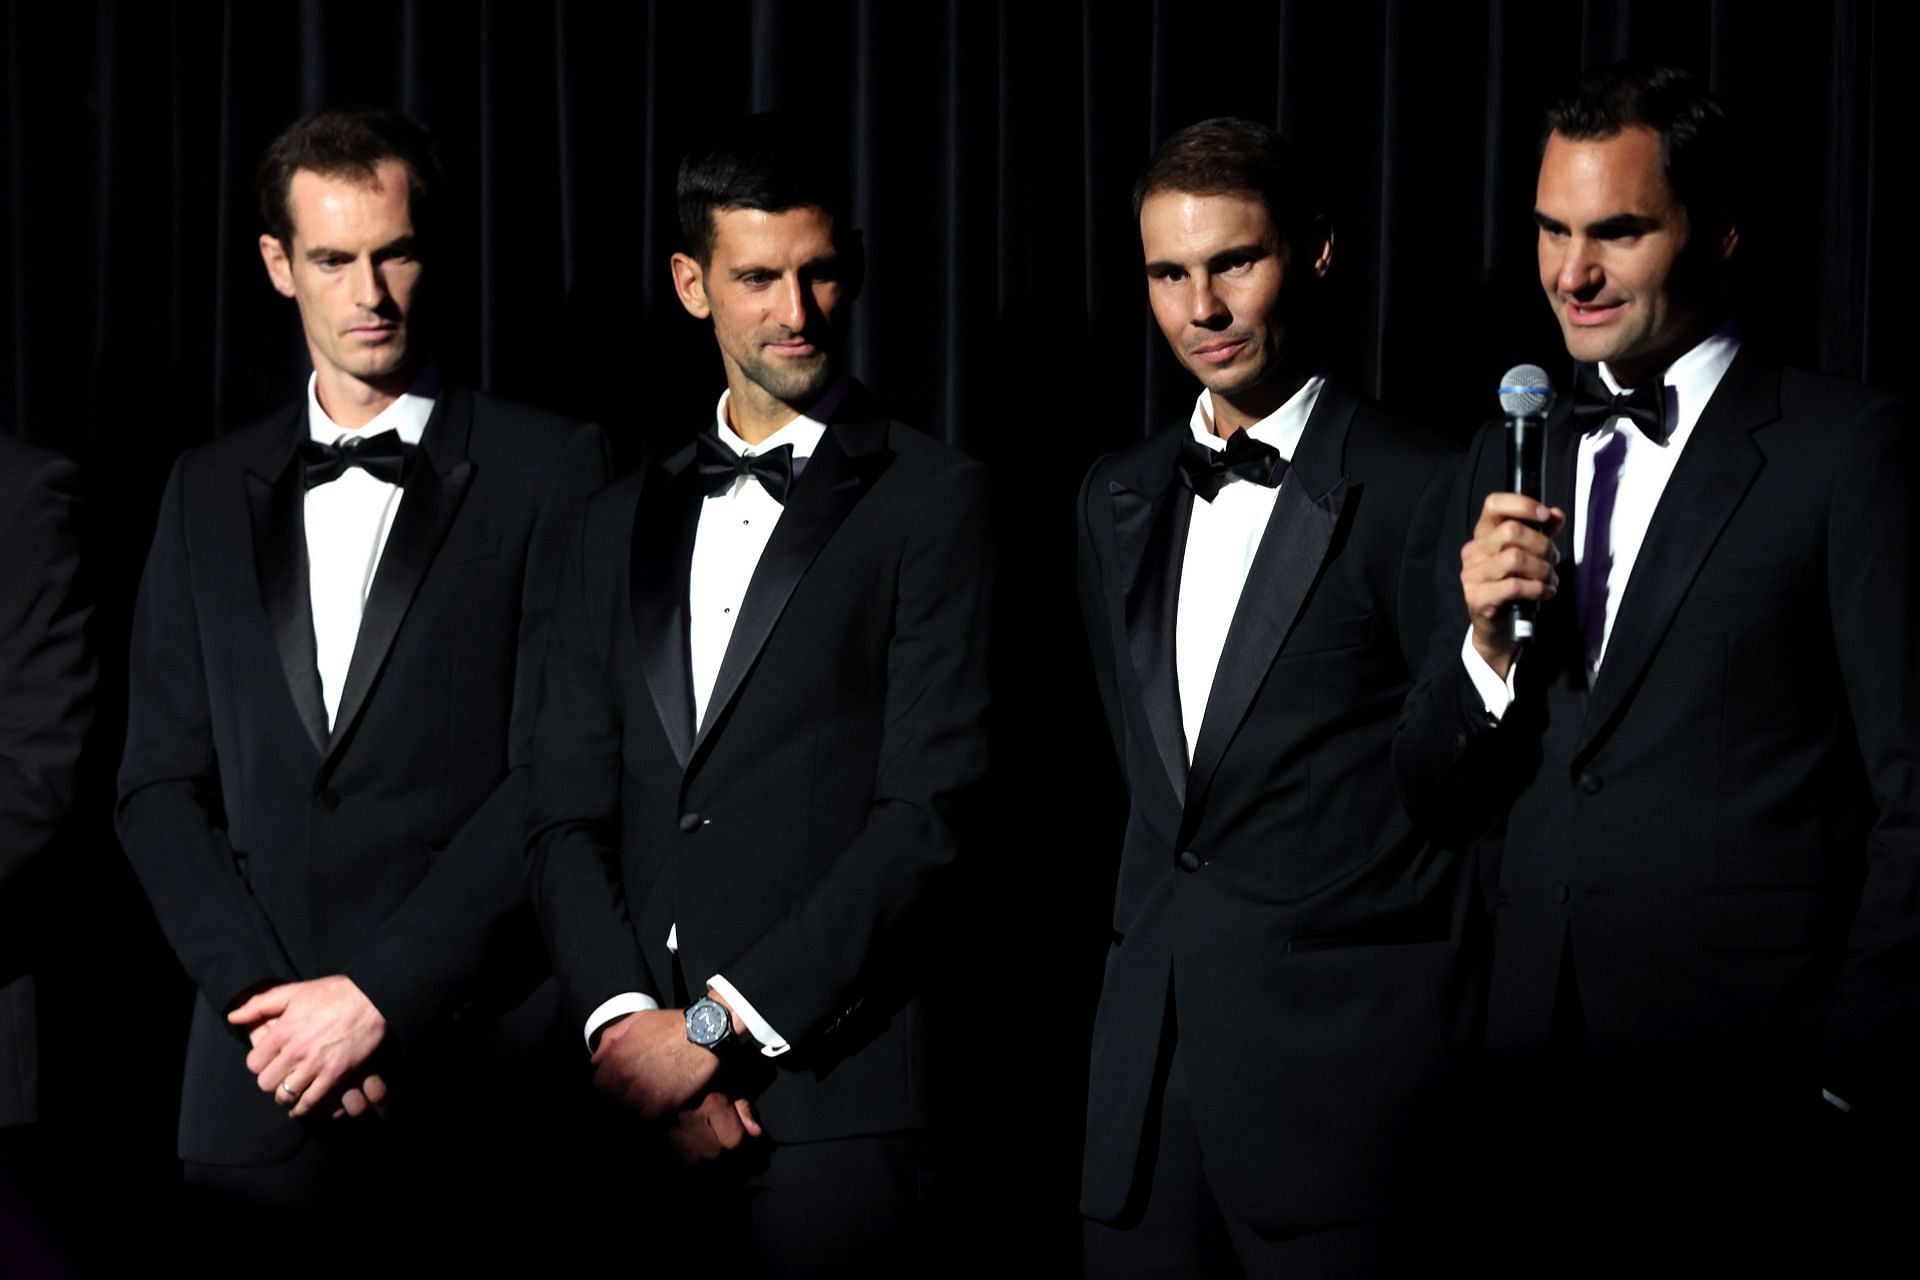 Roger Federer speaks during the Gala Dinner at Somerset House ahead of the Laver Cup 2022 